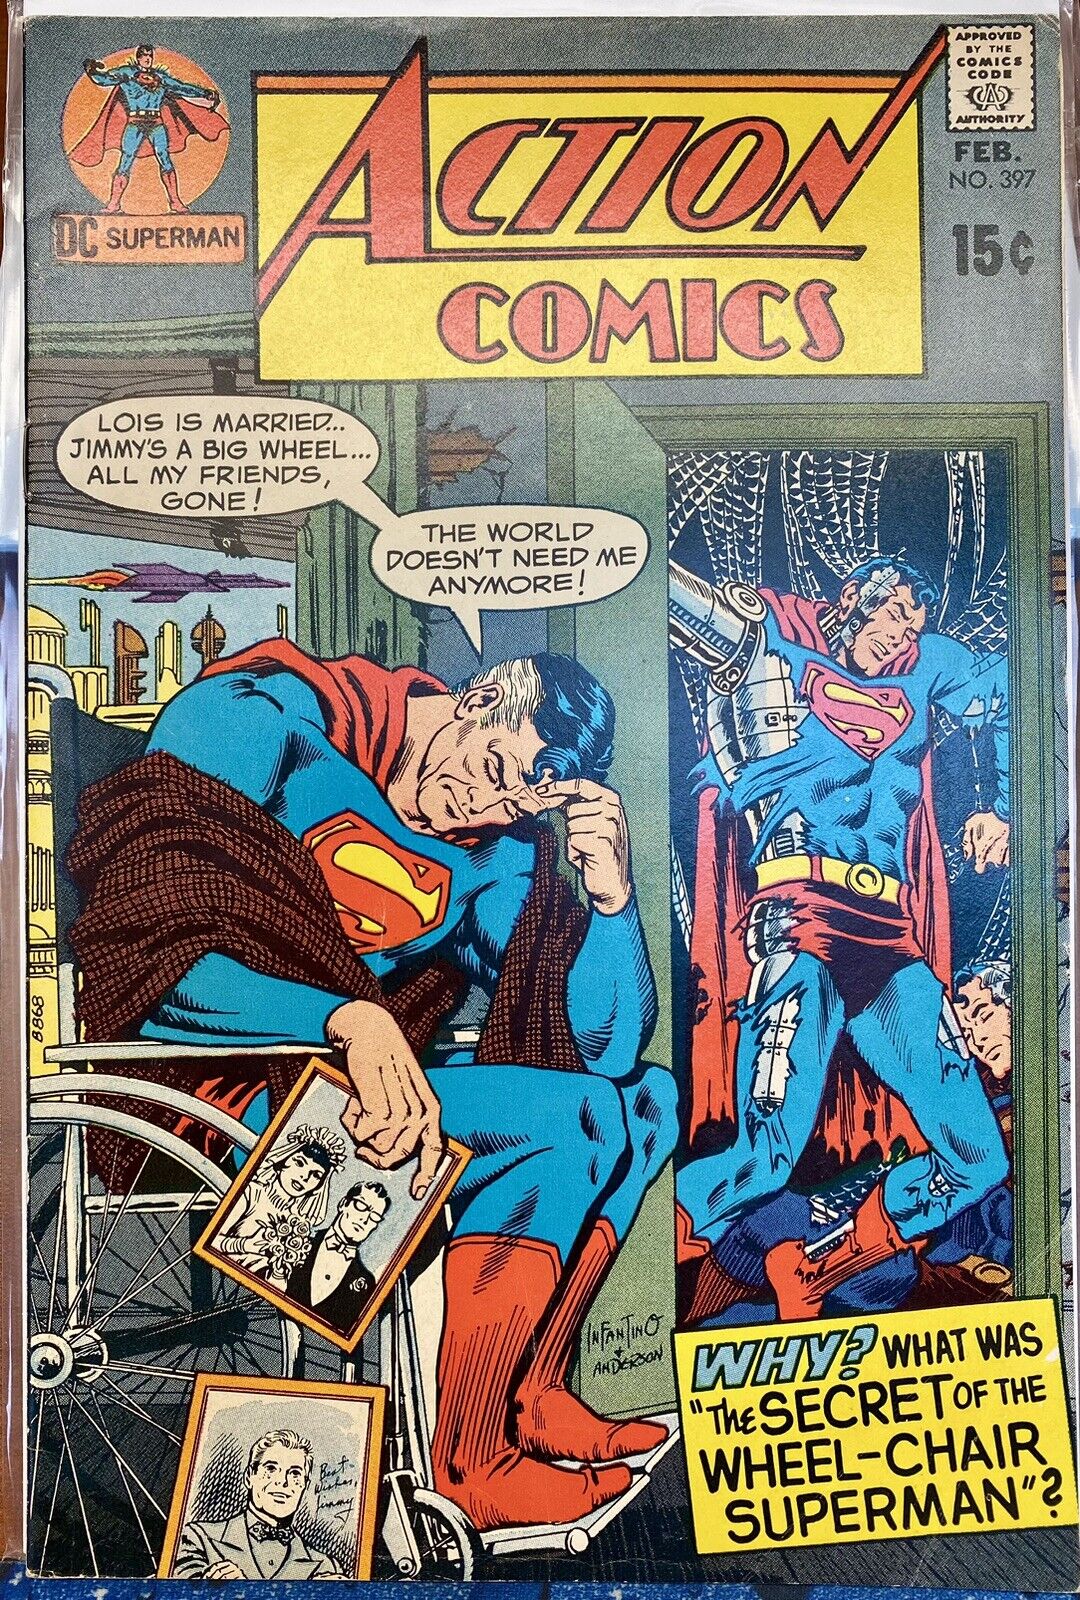 Action Comics #347 (1971) by DC Comics in VF Condition